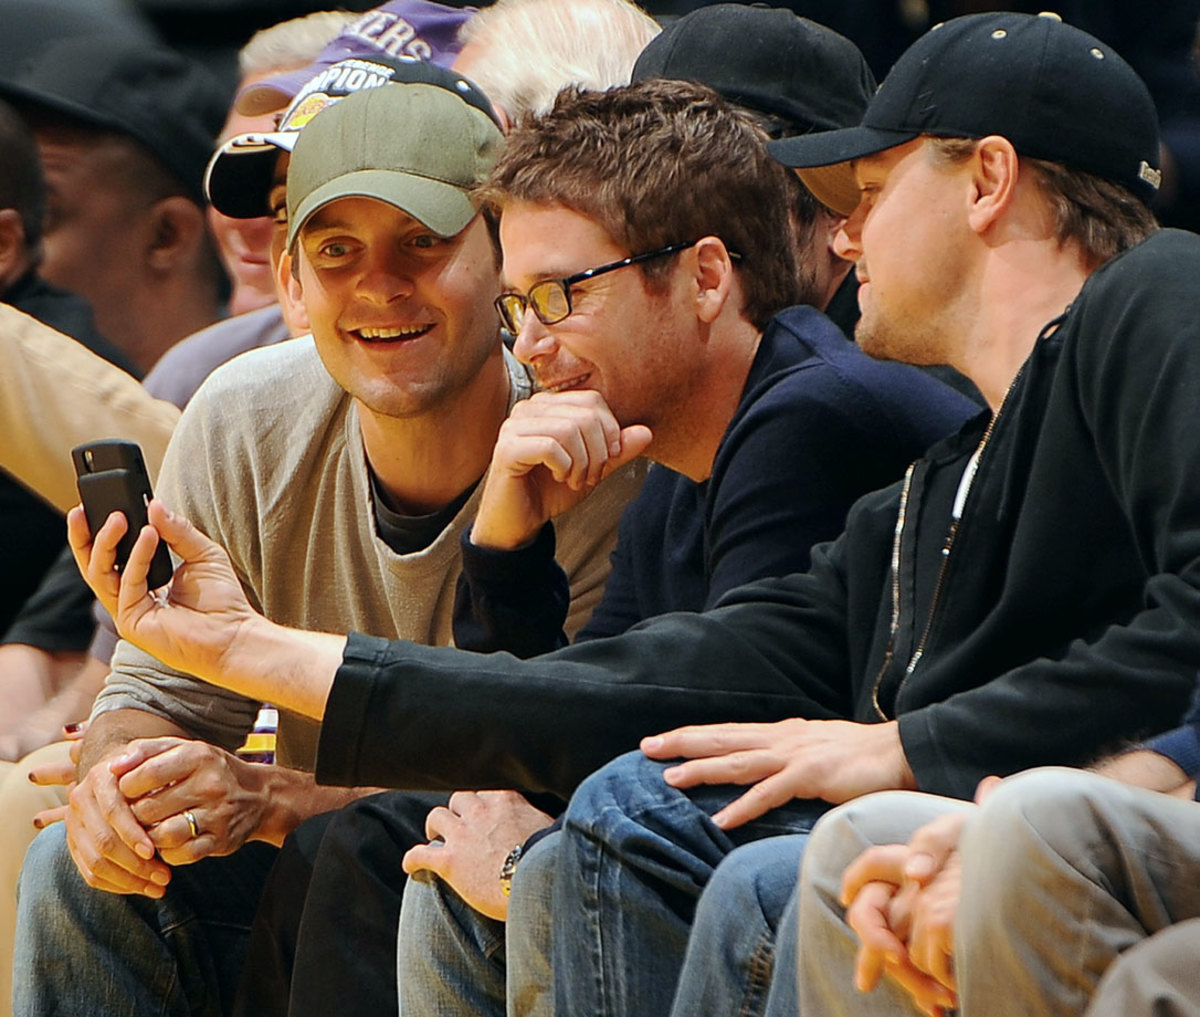 2009-1108-Leonardo-DiCaprio-Tobey-Maguire-Kevin-Connolly-Lakers-game.jpg